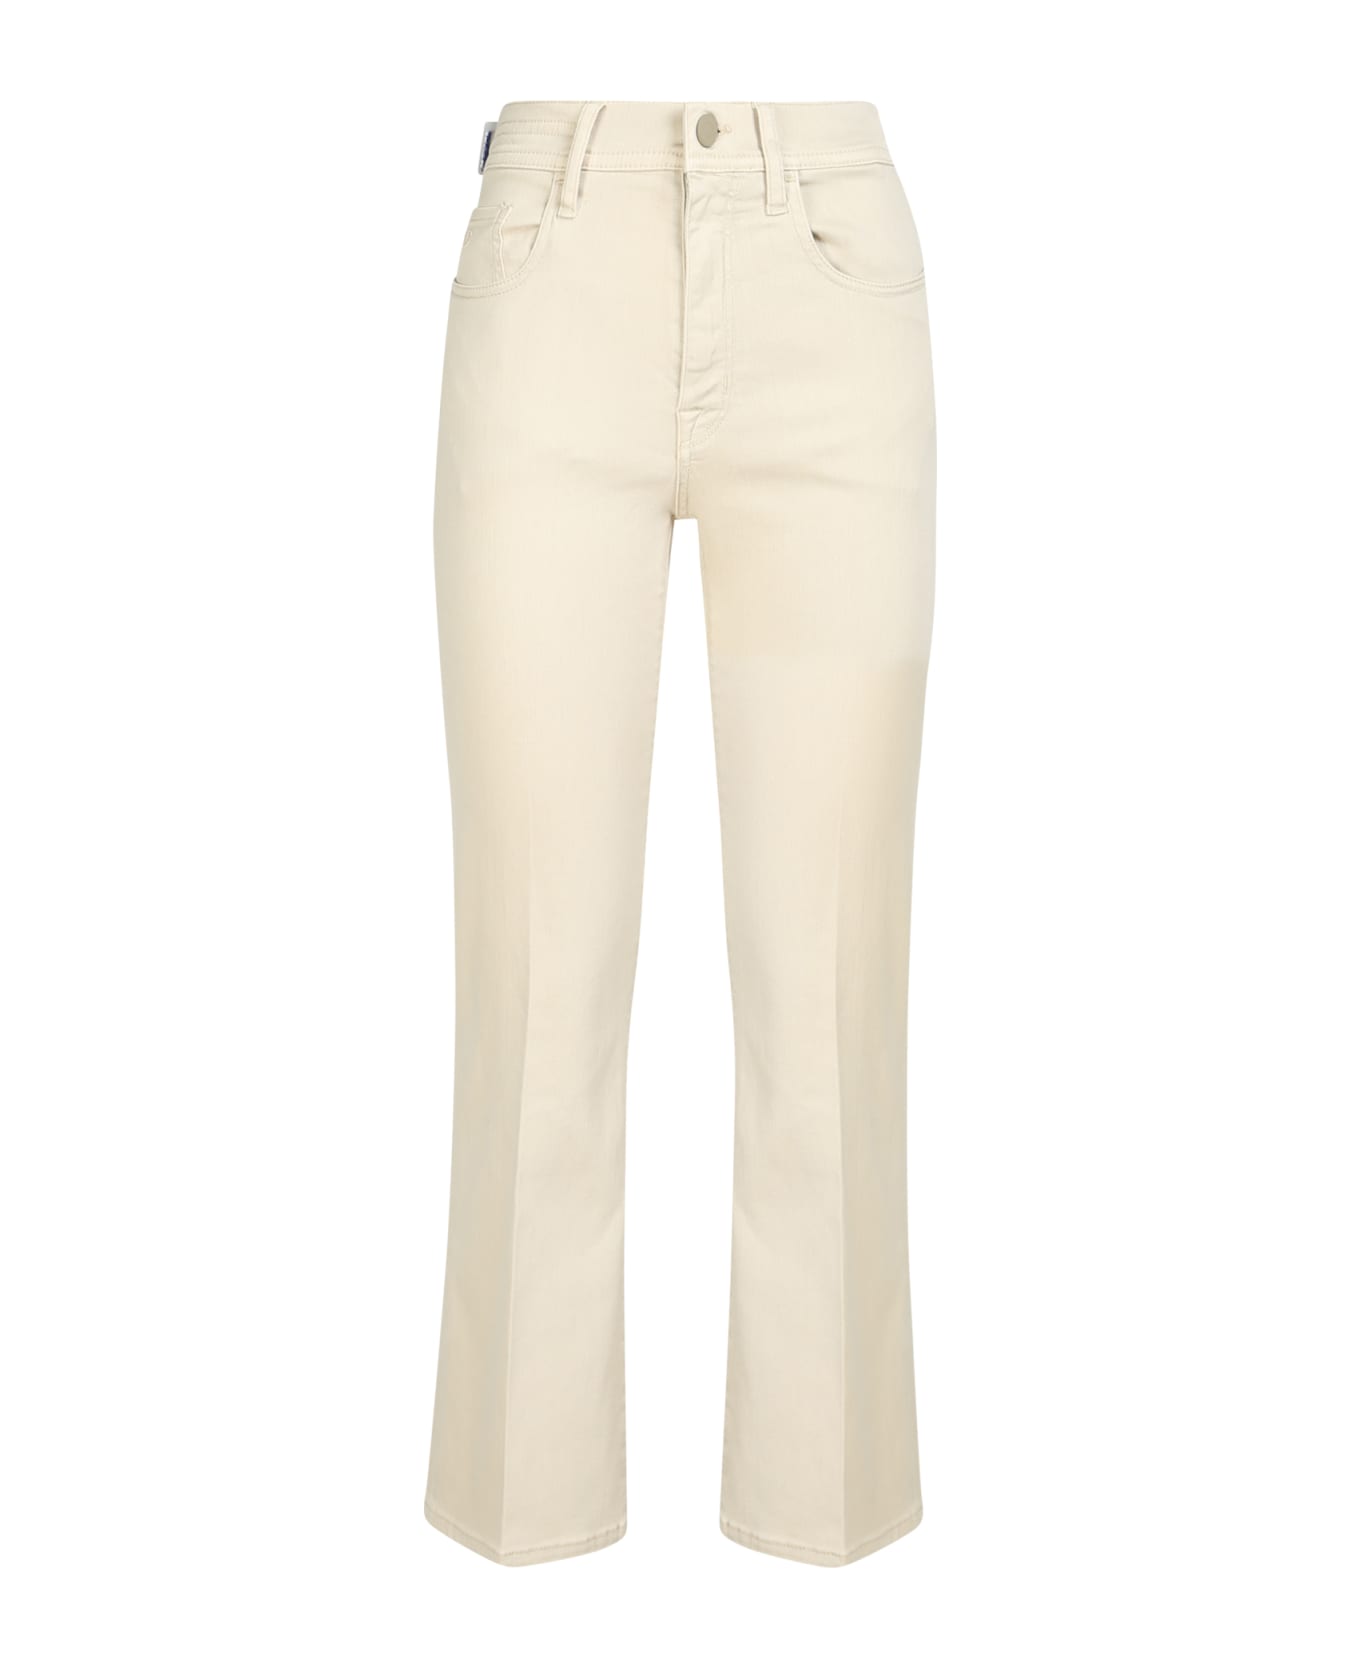 Jacob Cohen Flare Jeans - Beige ボトムス